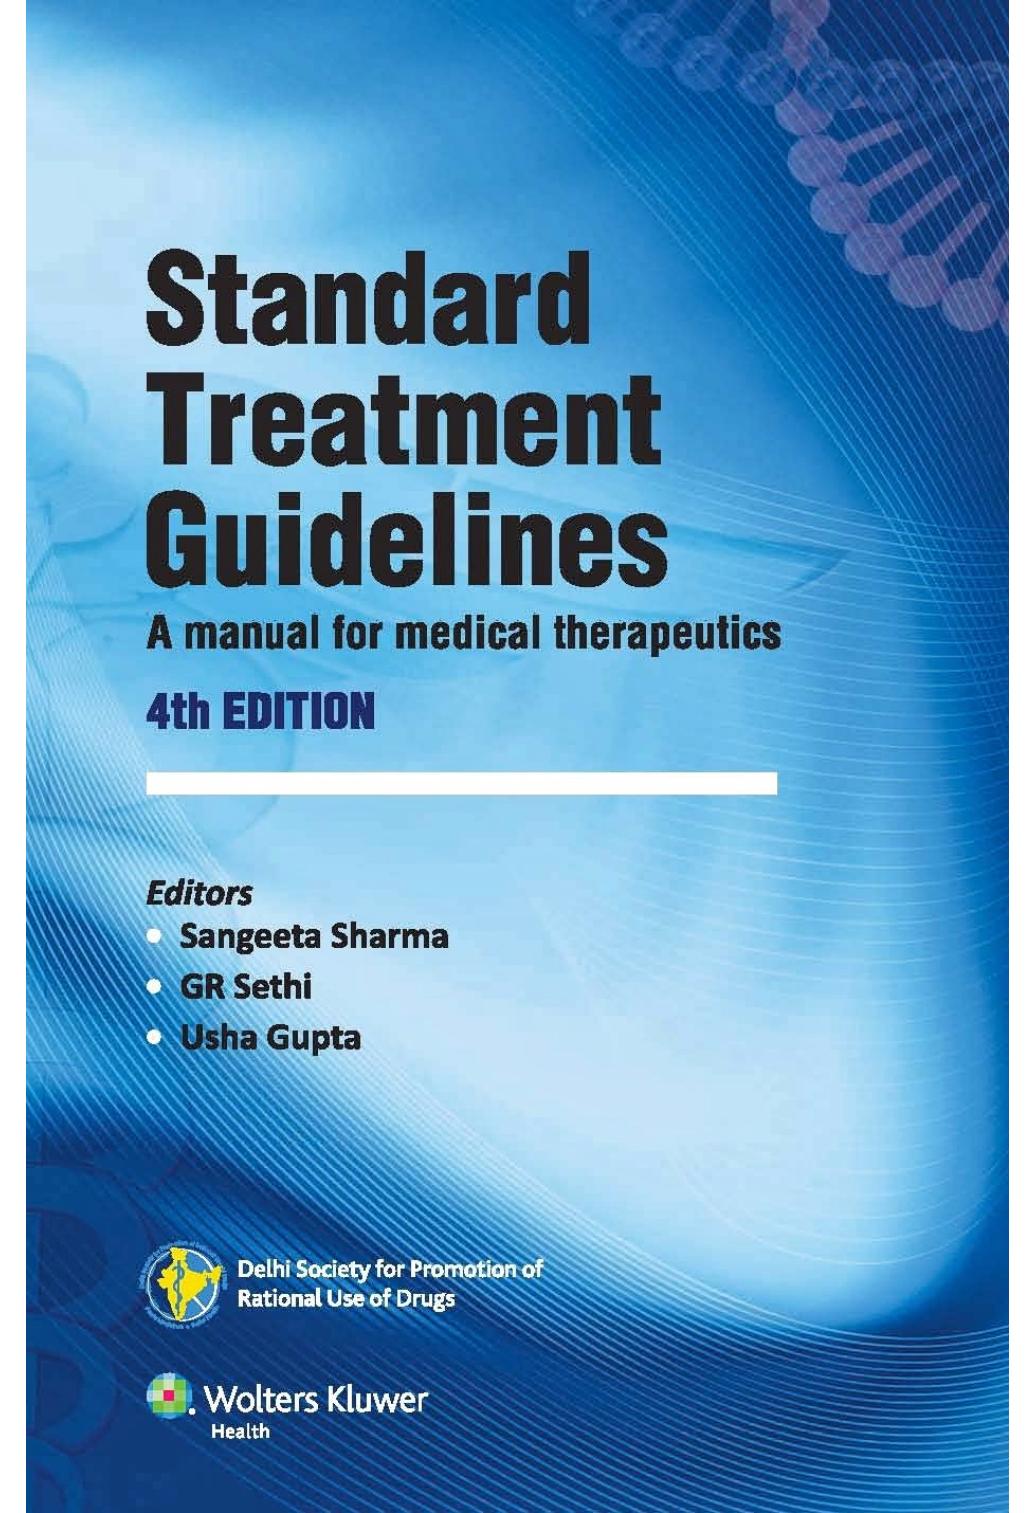 Standard Treatment Guidelines 2014